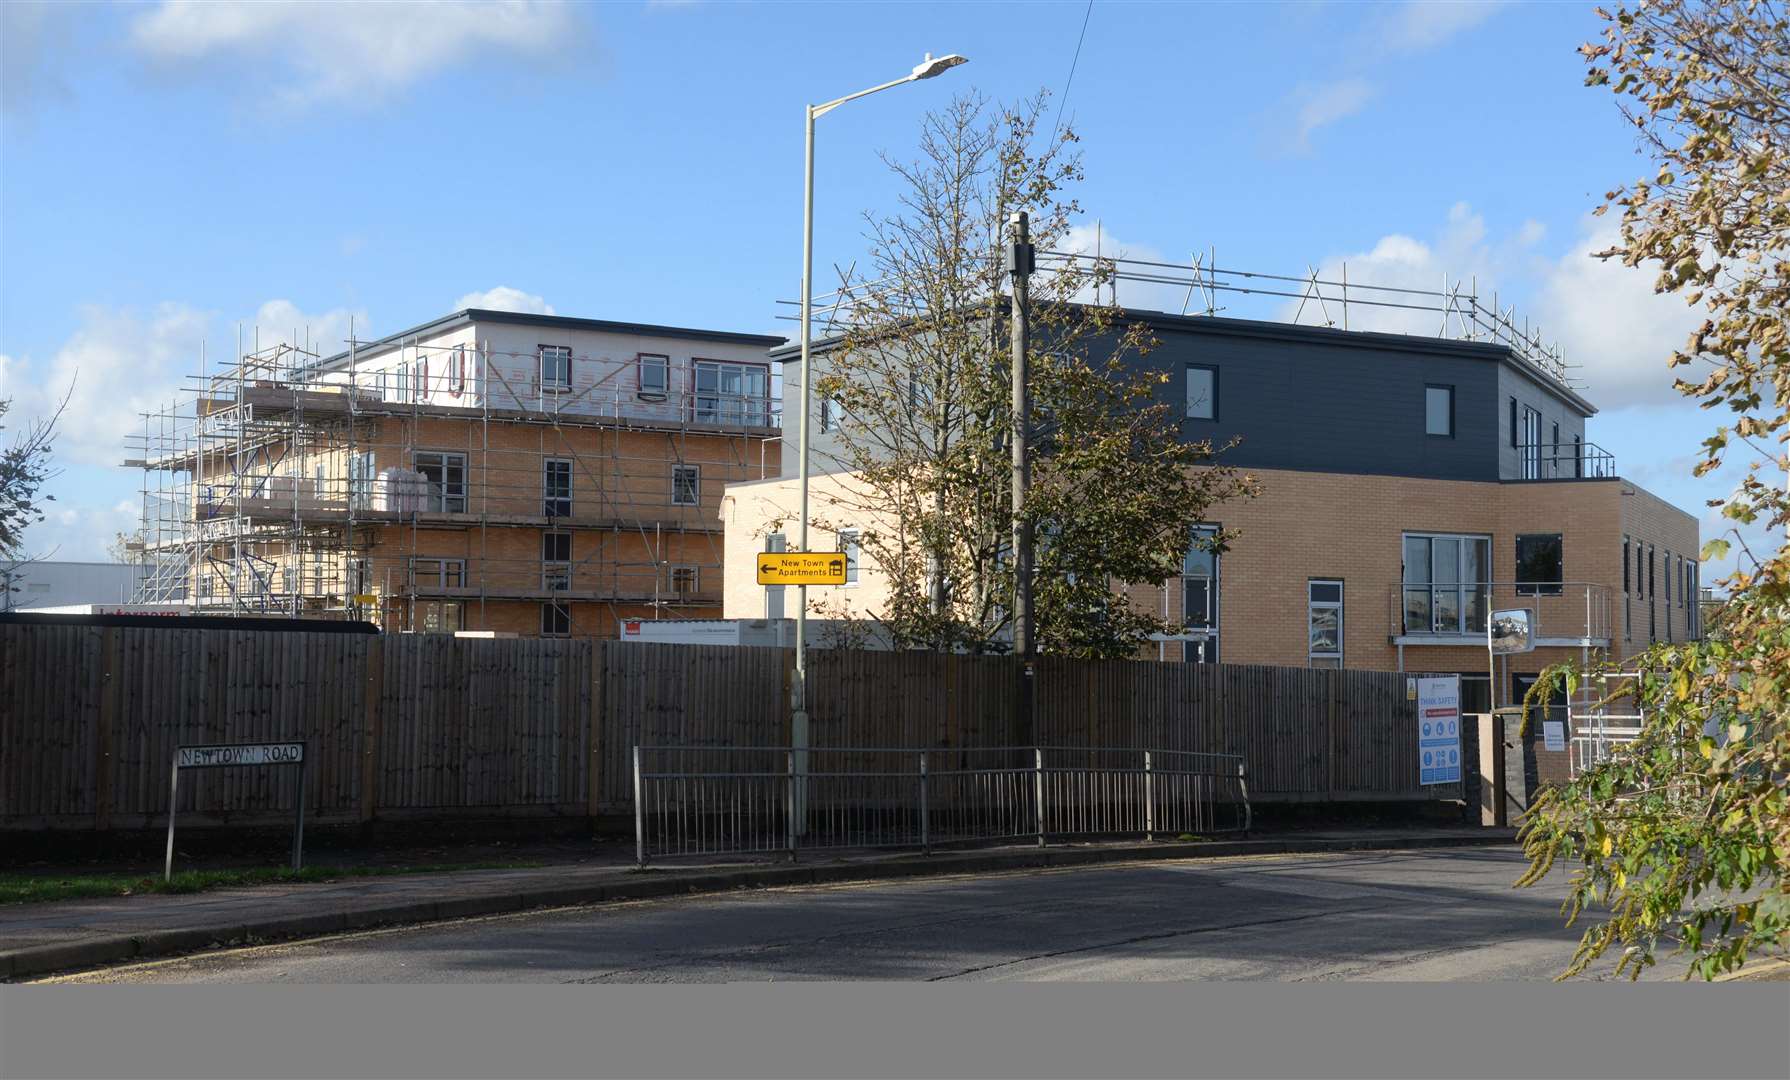 Ninety-three flats are being built in the former Klondyke site. Picture: Chris Davey